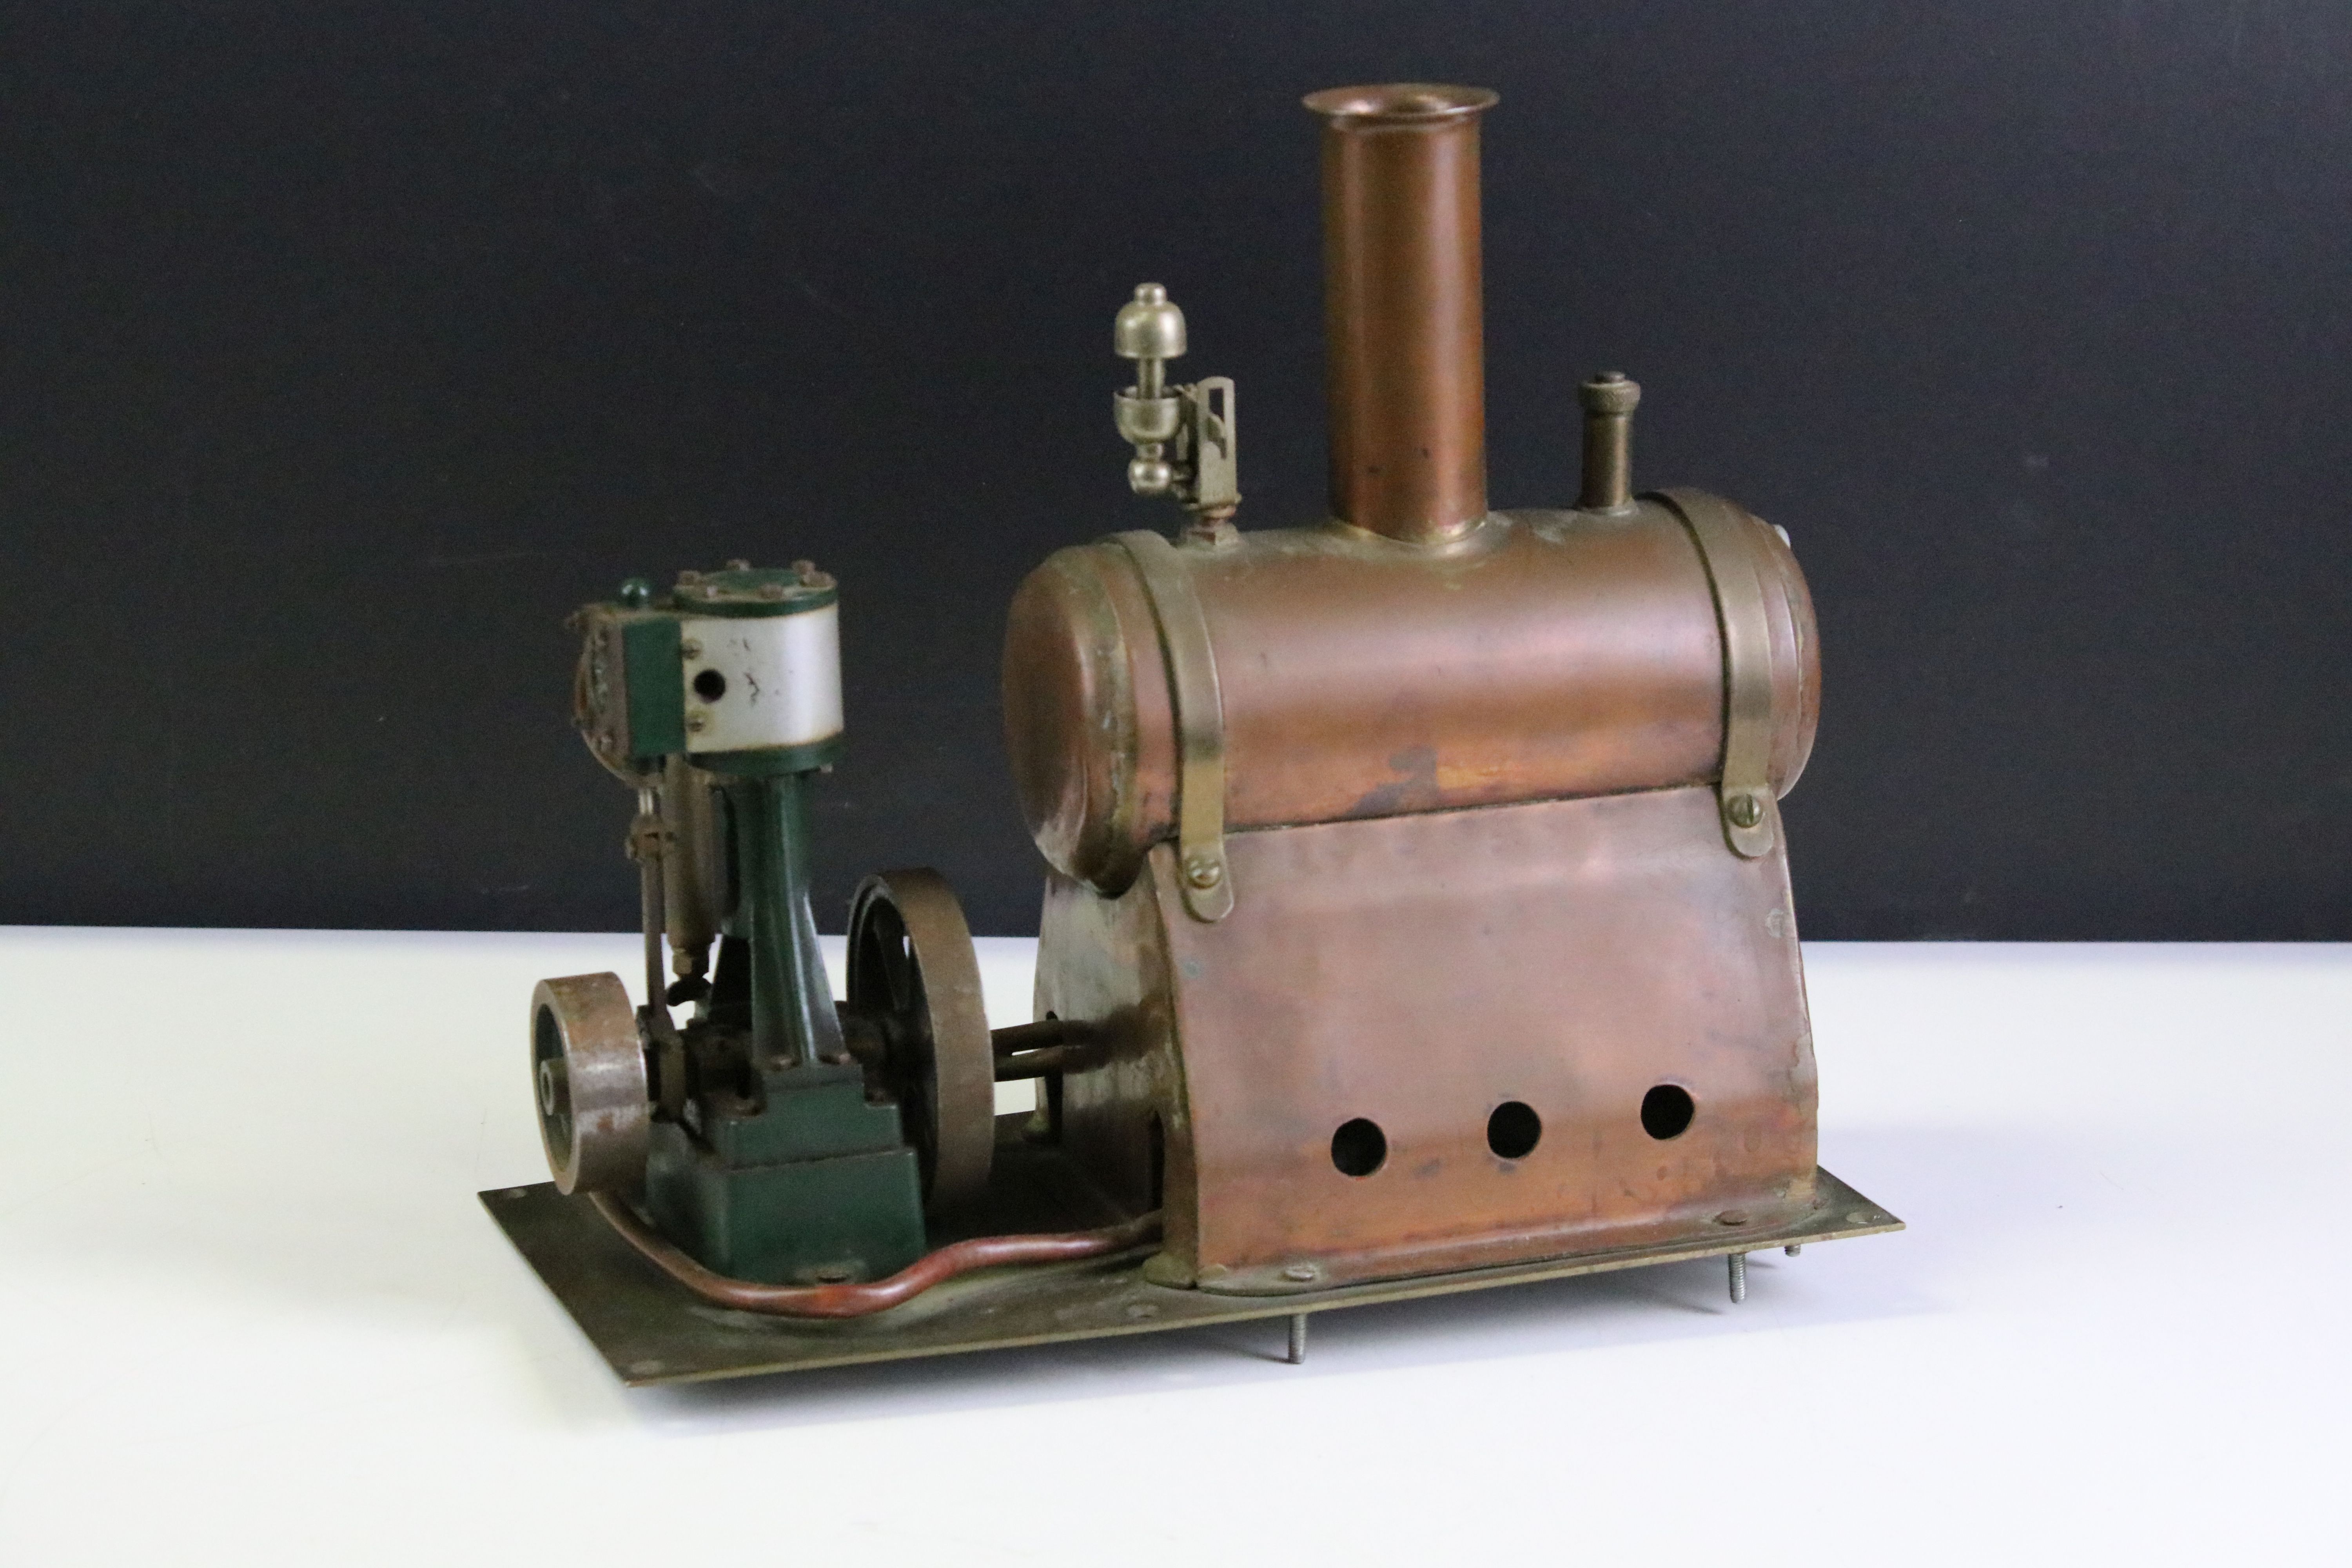 Mamod TE1A Steam Traction Engine plus an unmarked stationary steam engine and accessories - Image 3 of 6